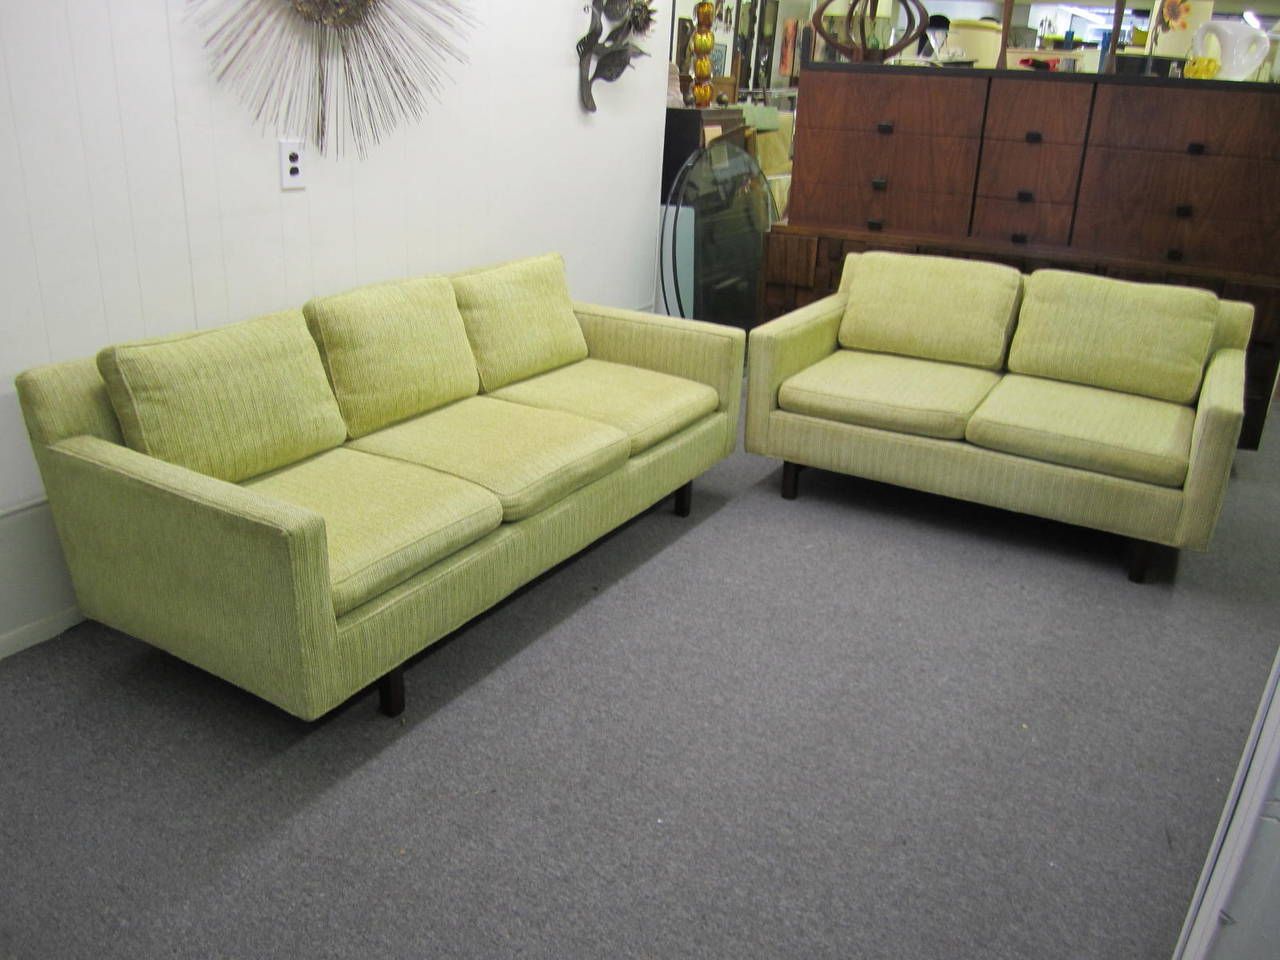 Famous Mid Century 3 Seat Couches Regarding Stunning Signed Dunbar Three Seater Sofa Mid Century Modern For Sale At (View 11 of 15)